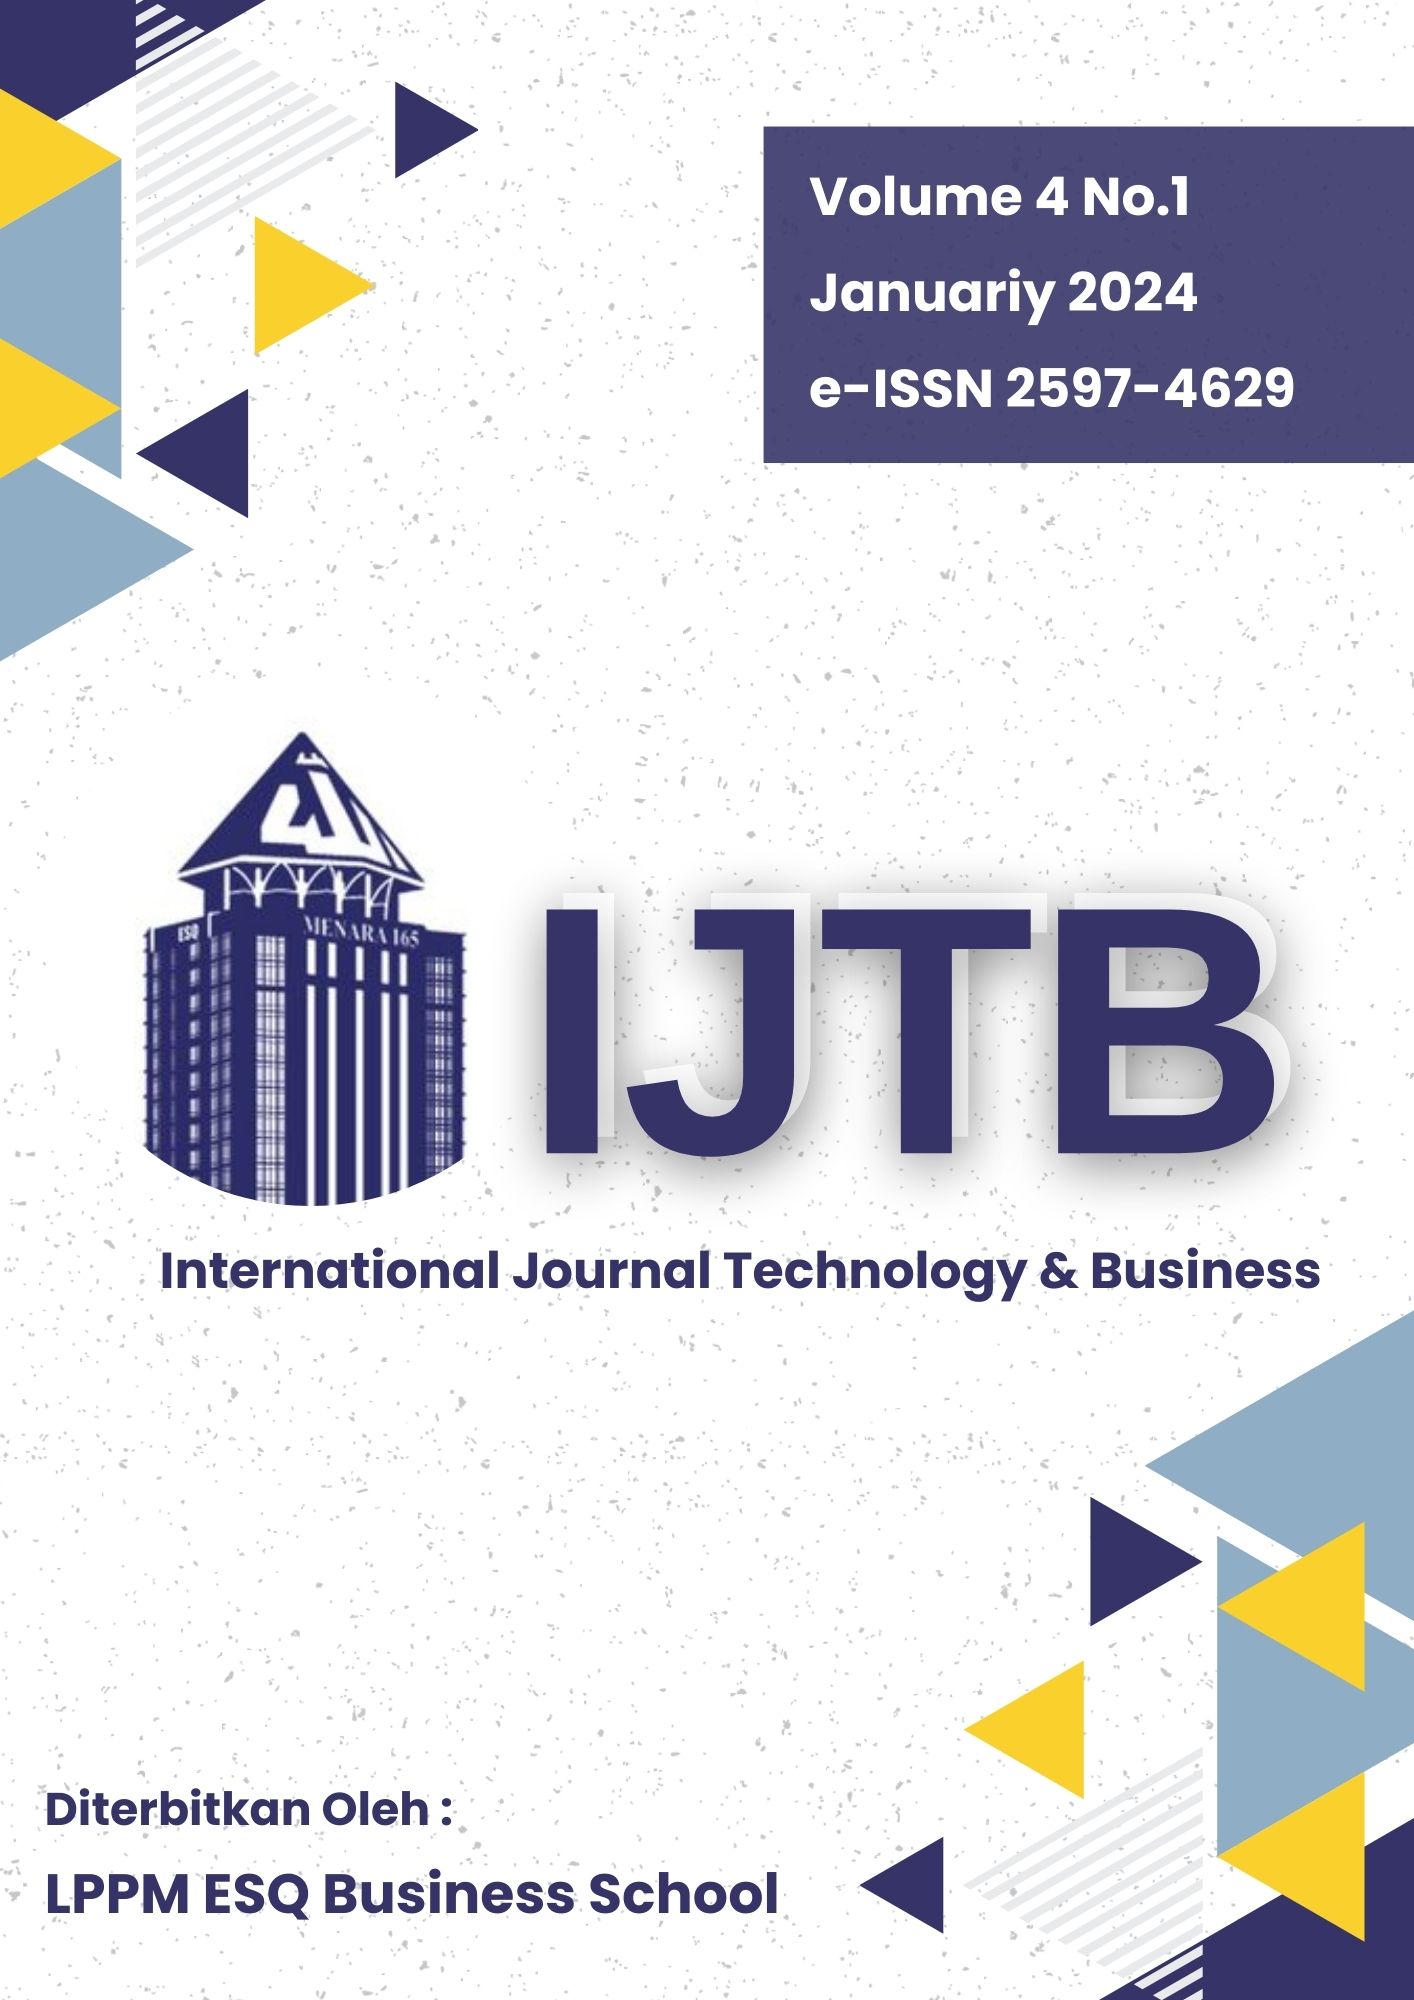 					View Vol. 4 No. 1 (2024): IJTB | INTERNATIONAL JOURNAL TECHNOLOGY AND BUSINESS
				